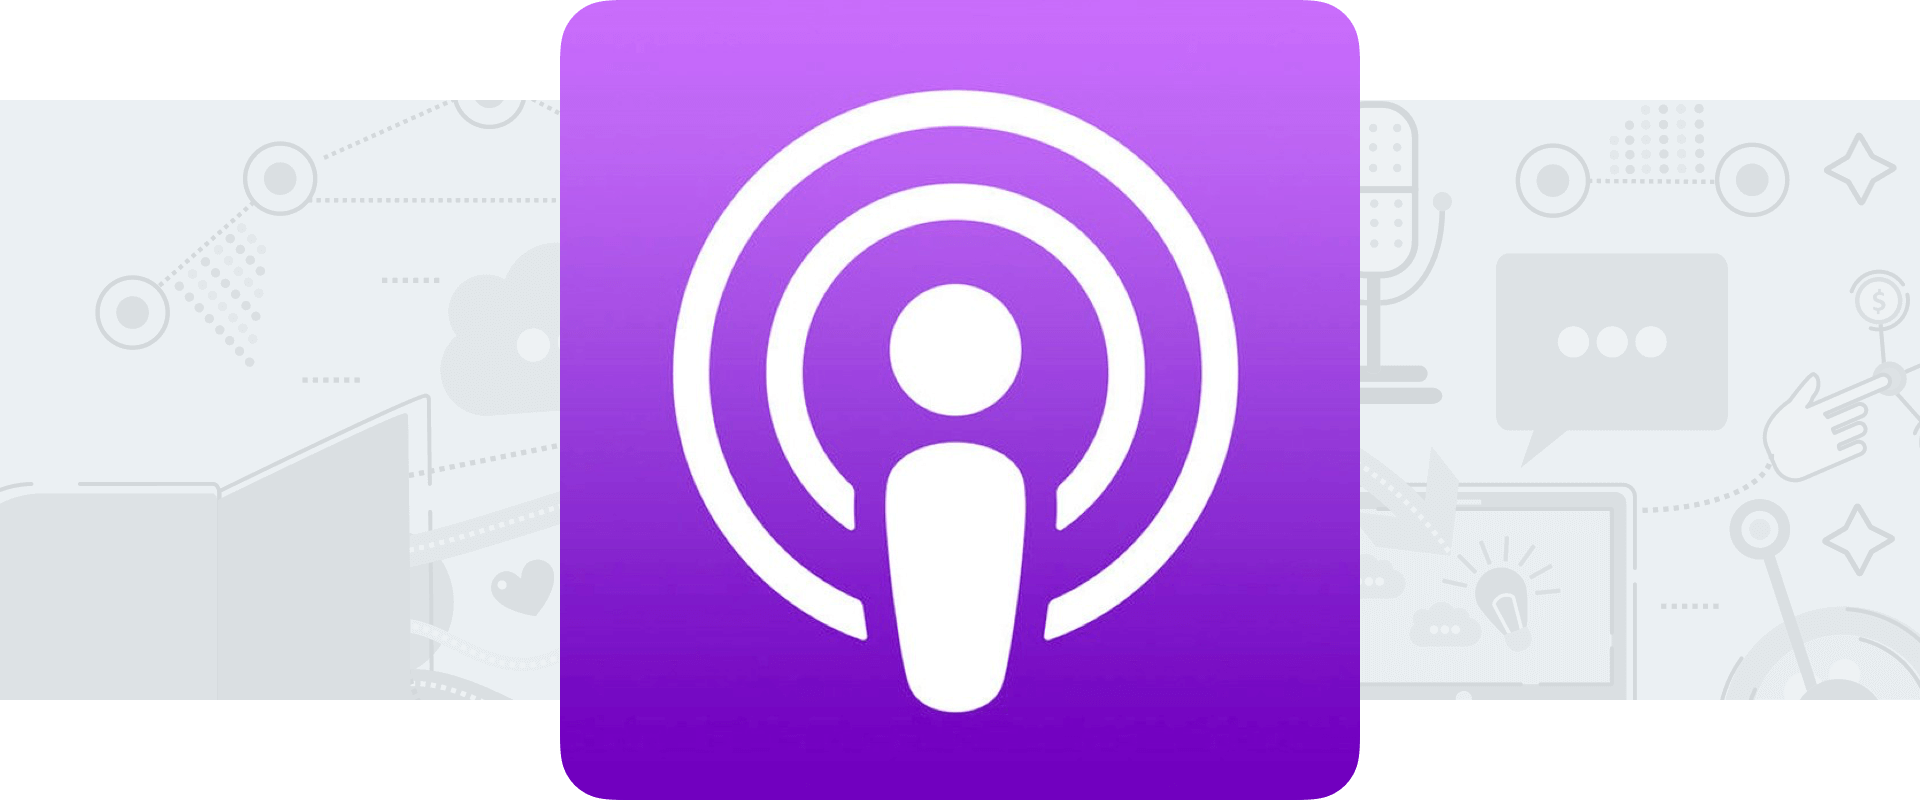 Apple Podcasts Categories 2019 Update 